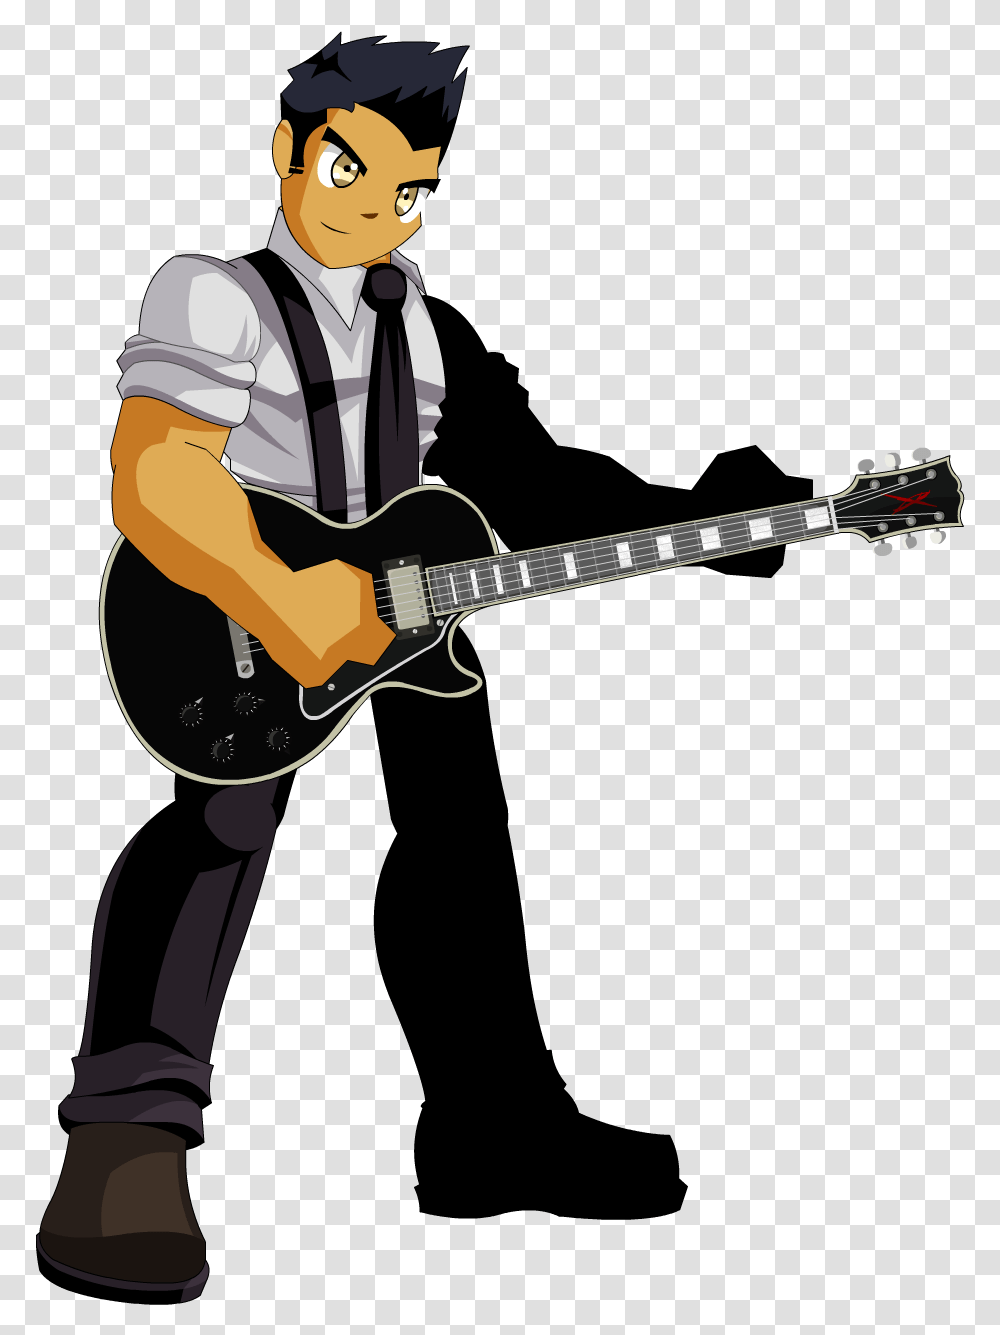 Making An Animated Aqwmv Progress Pics Inside Guitarist Animated, Leisure Activities, Musical Instrument, Performer, Musician Transparent Png